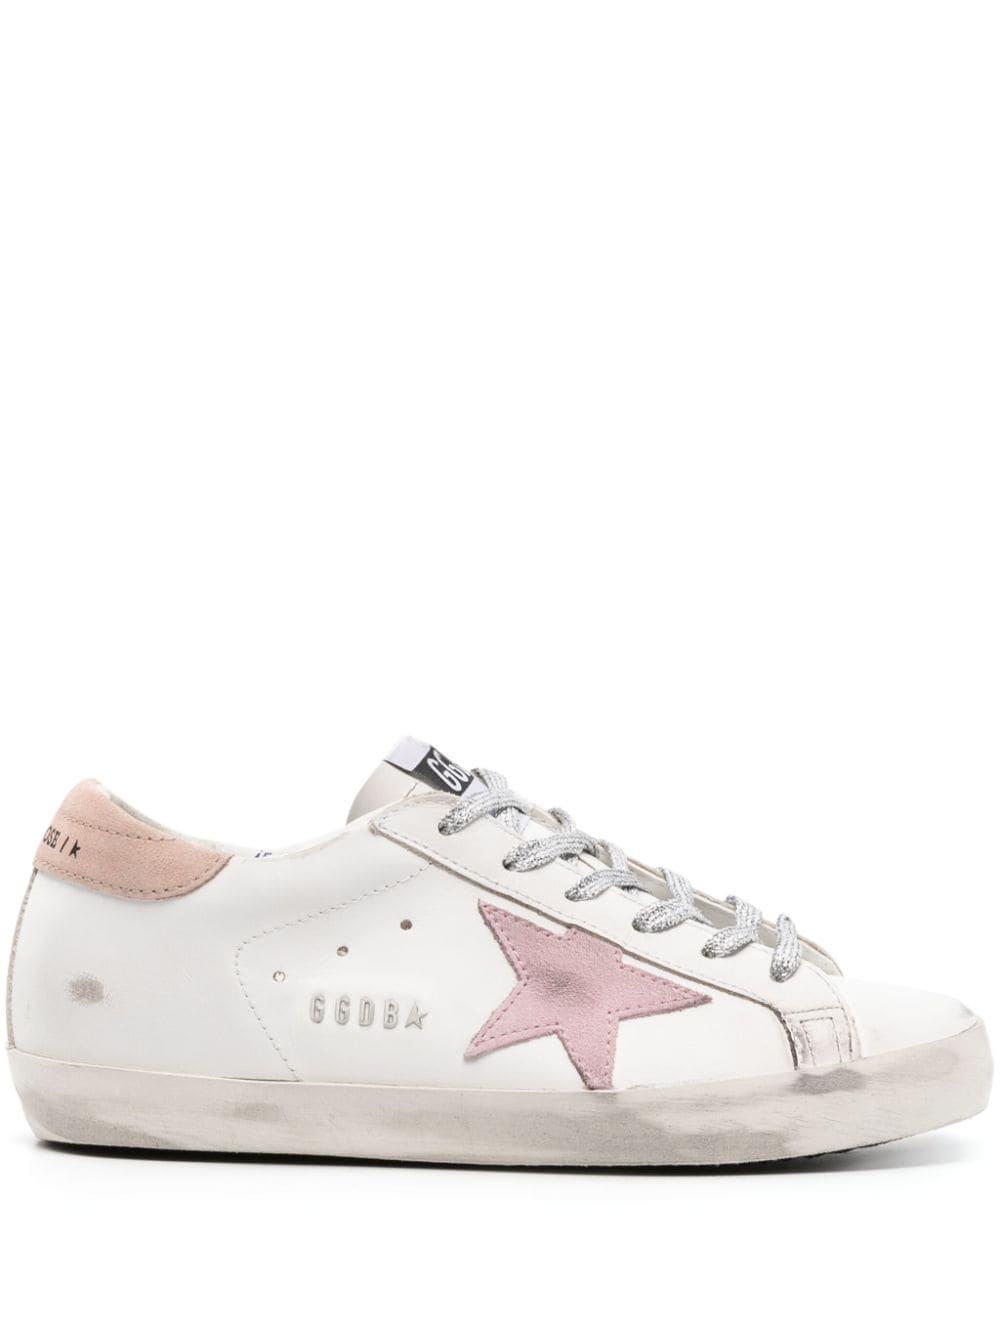 White/pink star patch sneakers